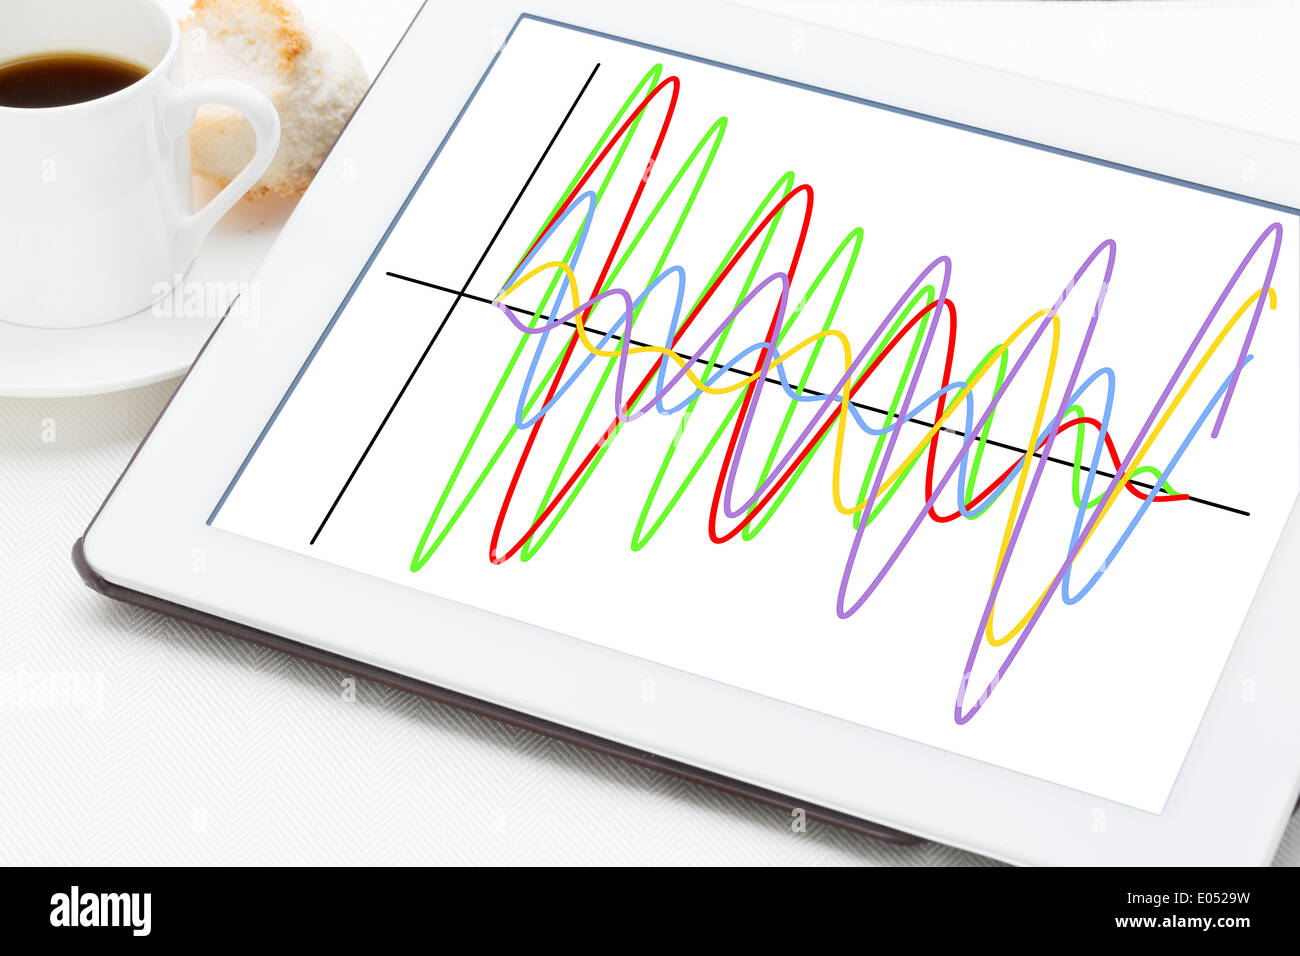 graph of different wave signals on a digital tablet with a cup of coffee Stock Photo